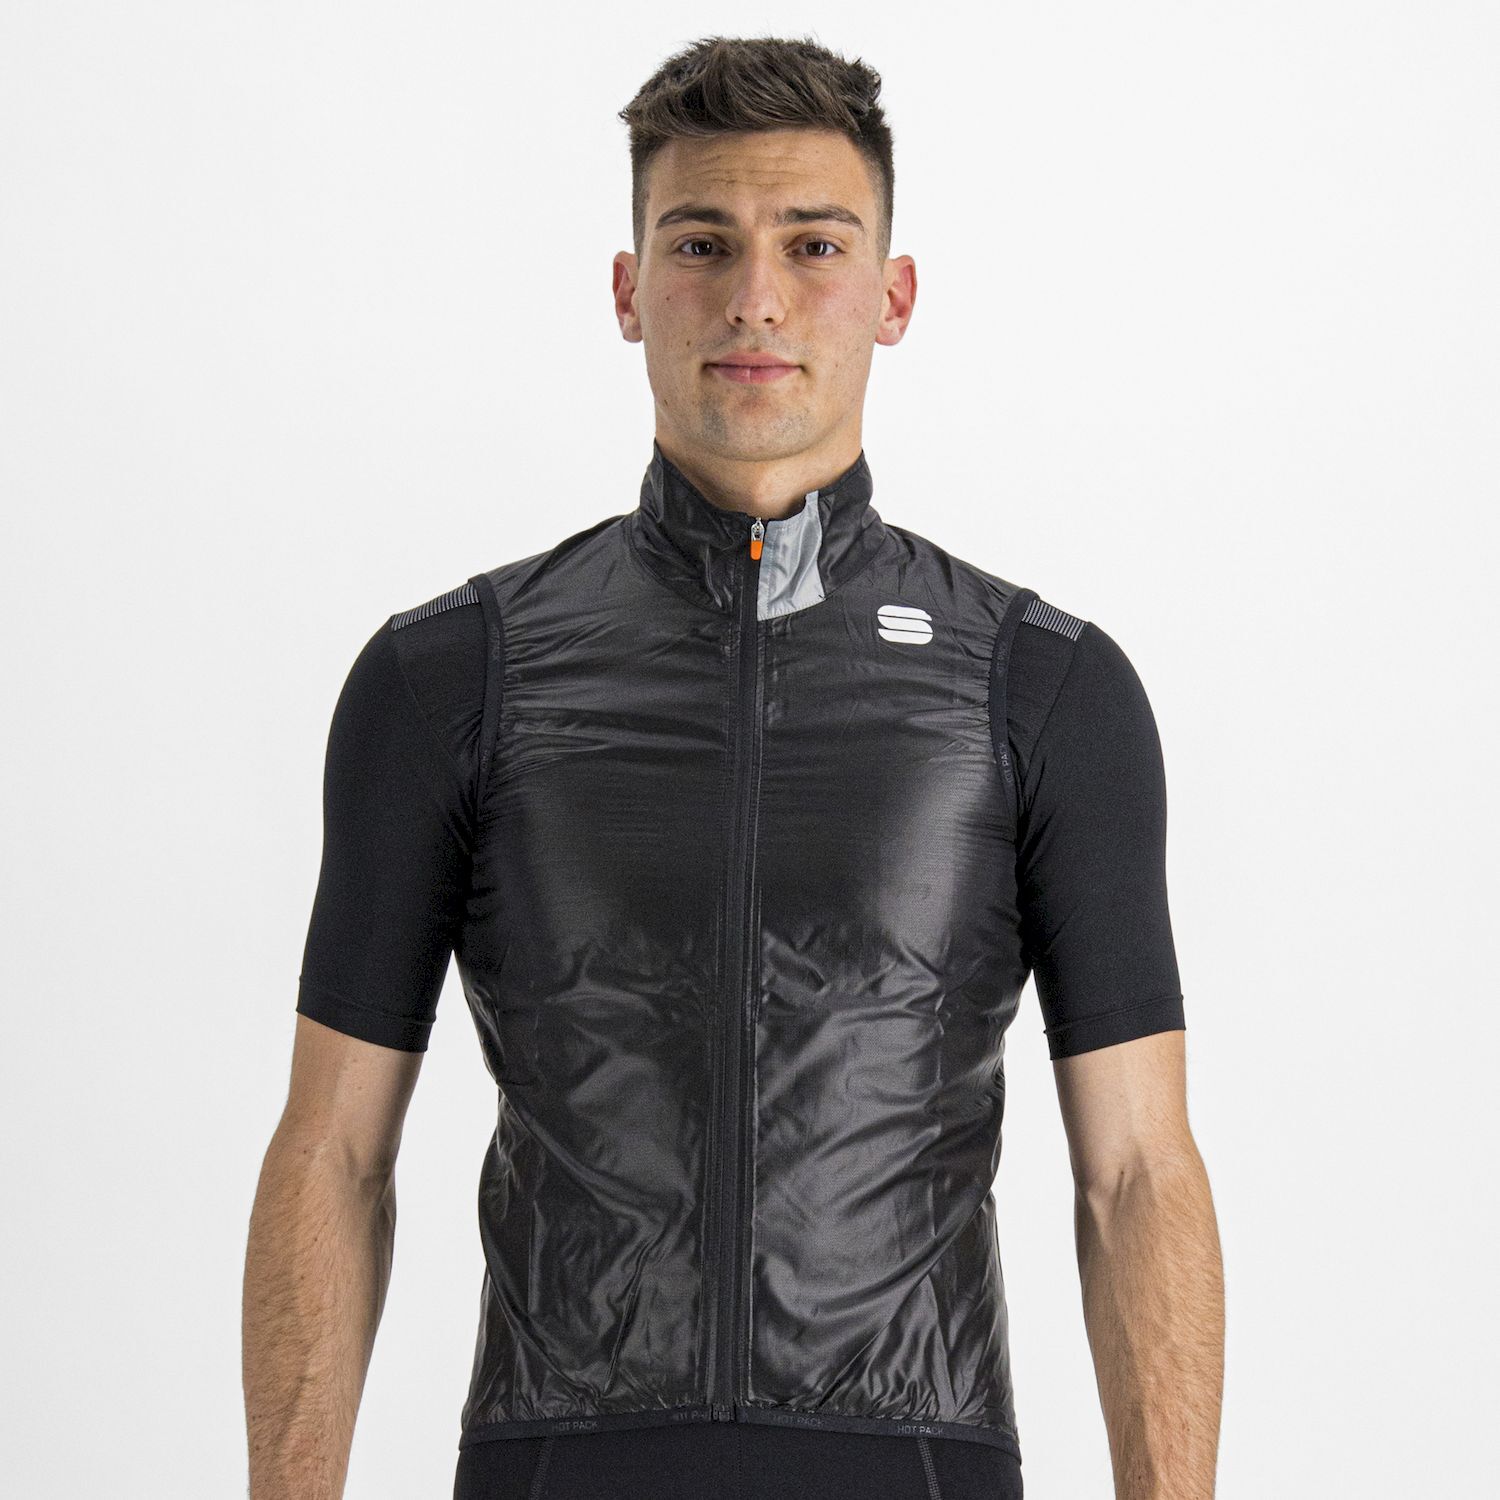 Sportful Hot Pack Easylight - Gilet ciclismo - Uomo